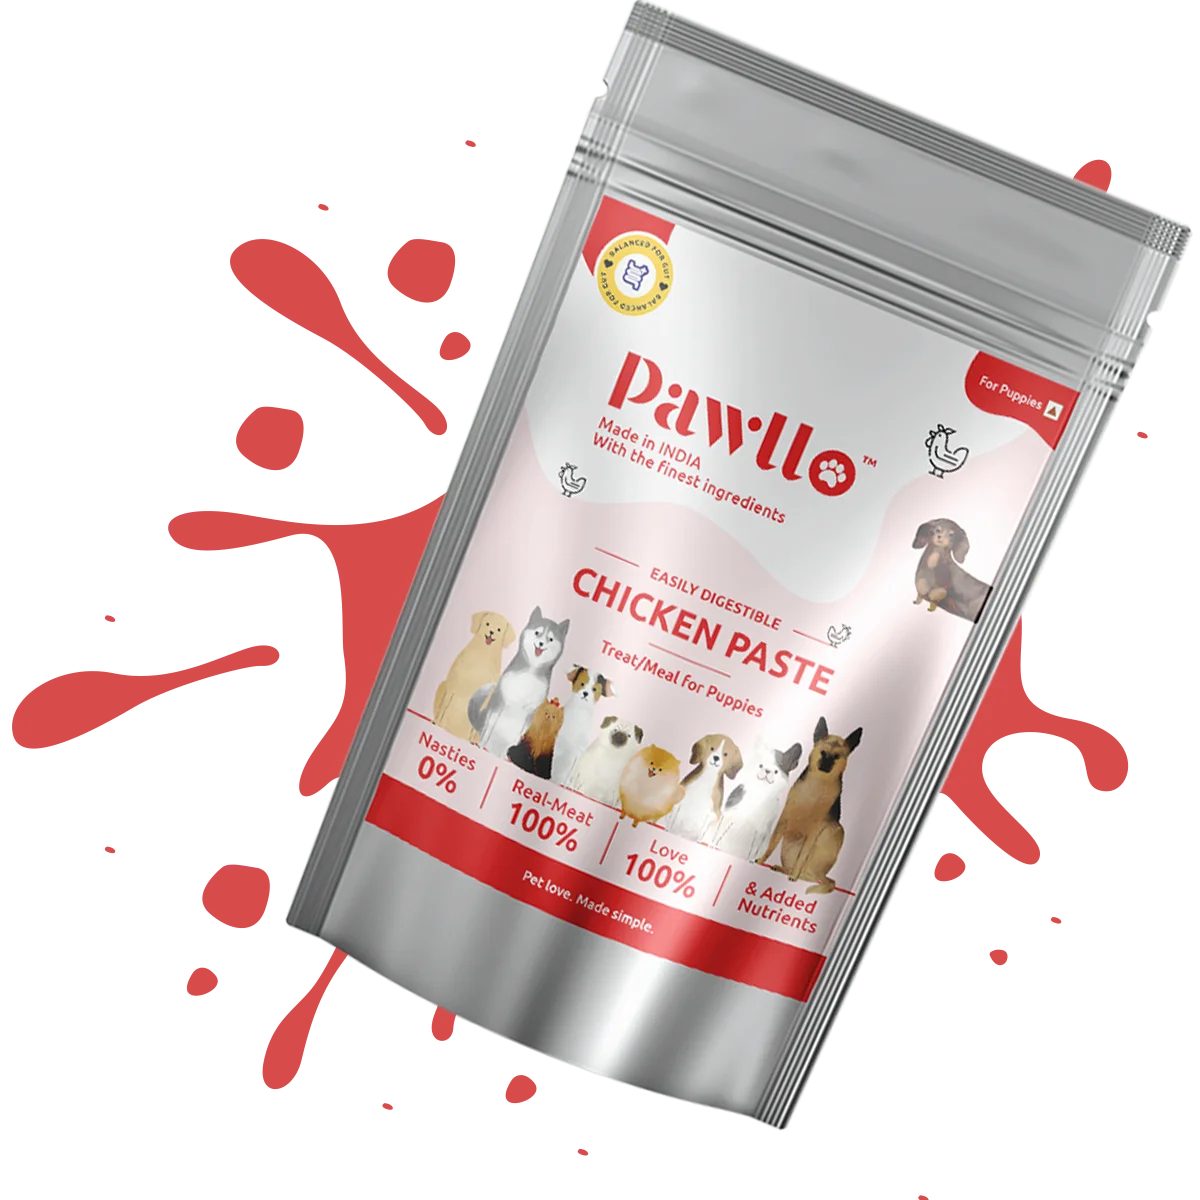 Chicken Paste (Puppies) Nutrient-Rich Chicken Paste - Omega-3, Protein, and Vitamin Boost for Happy Pups